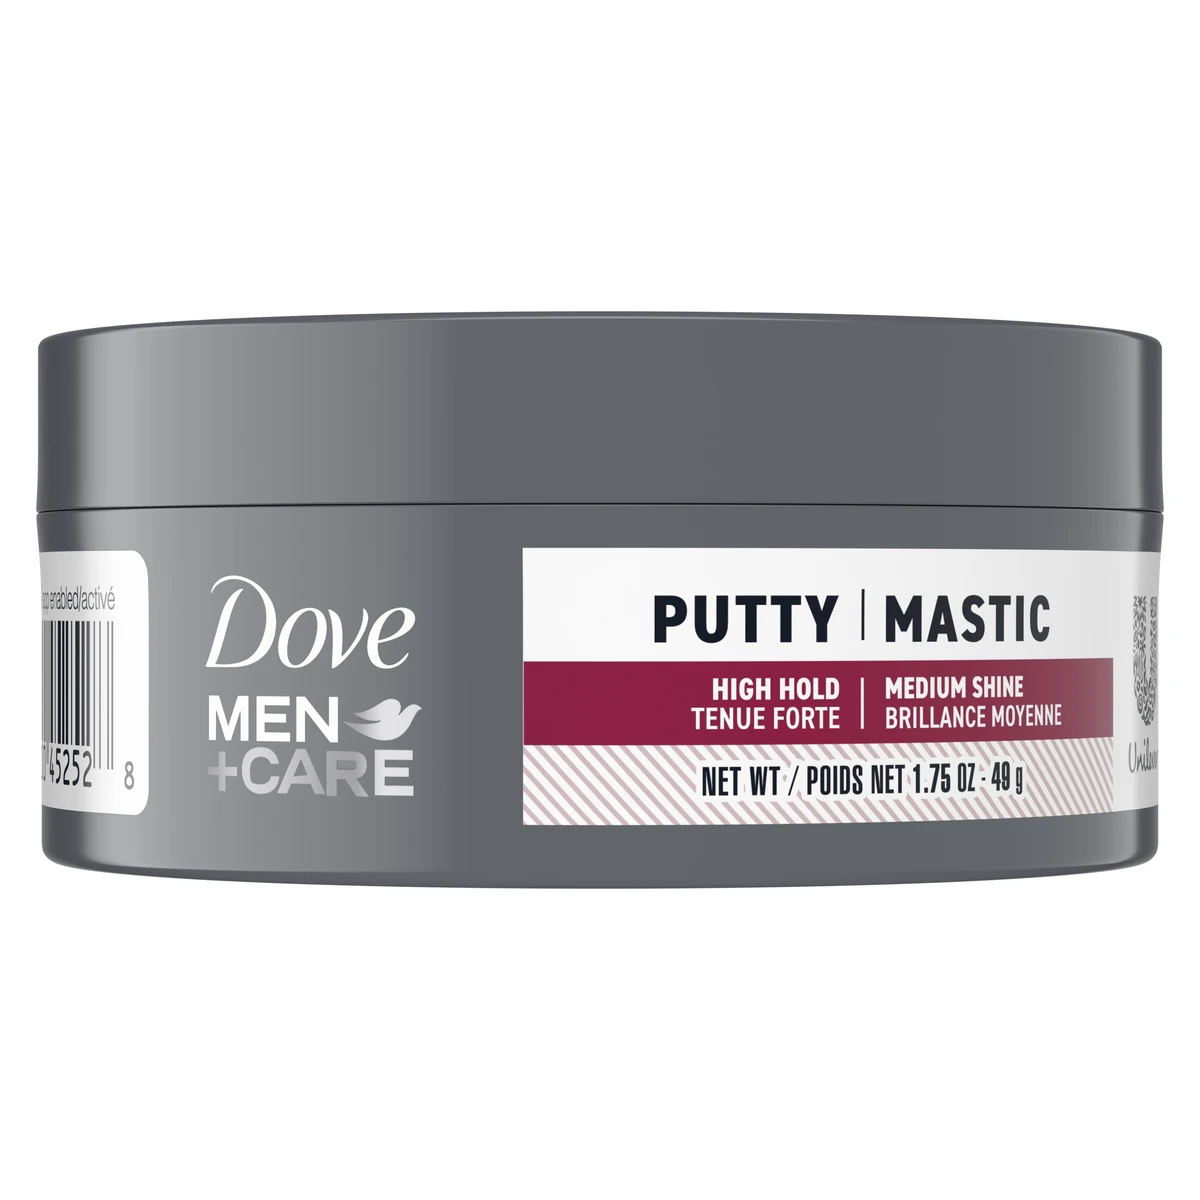 Dove Men + Care Textured Look + Strong Hold + Natural Finish Manipulating Putty  1.75oz